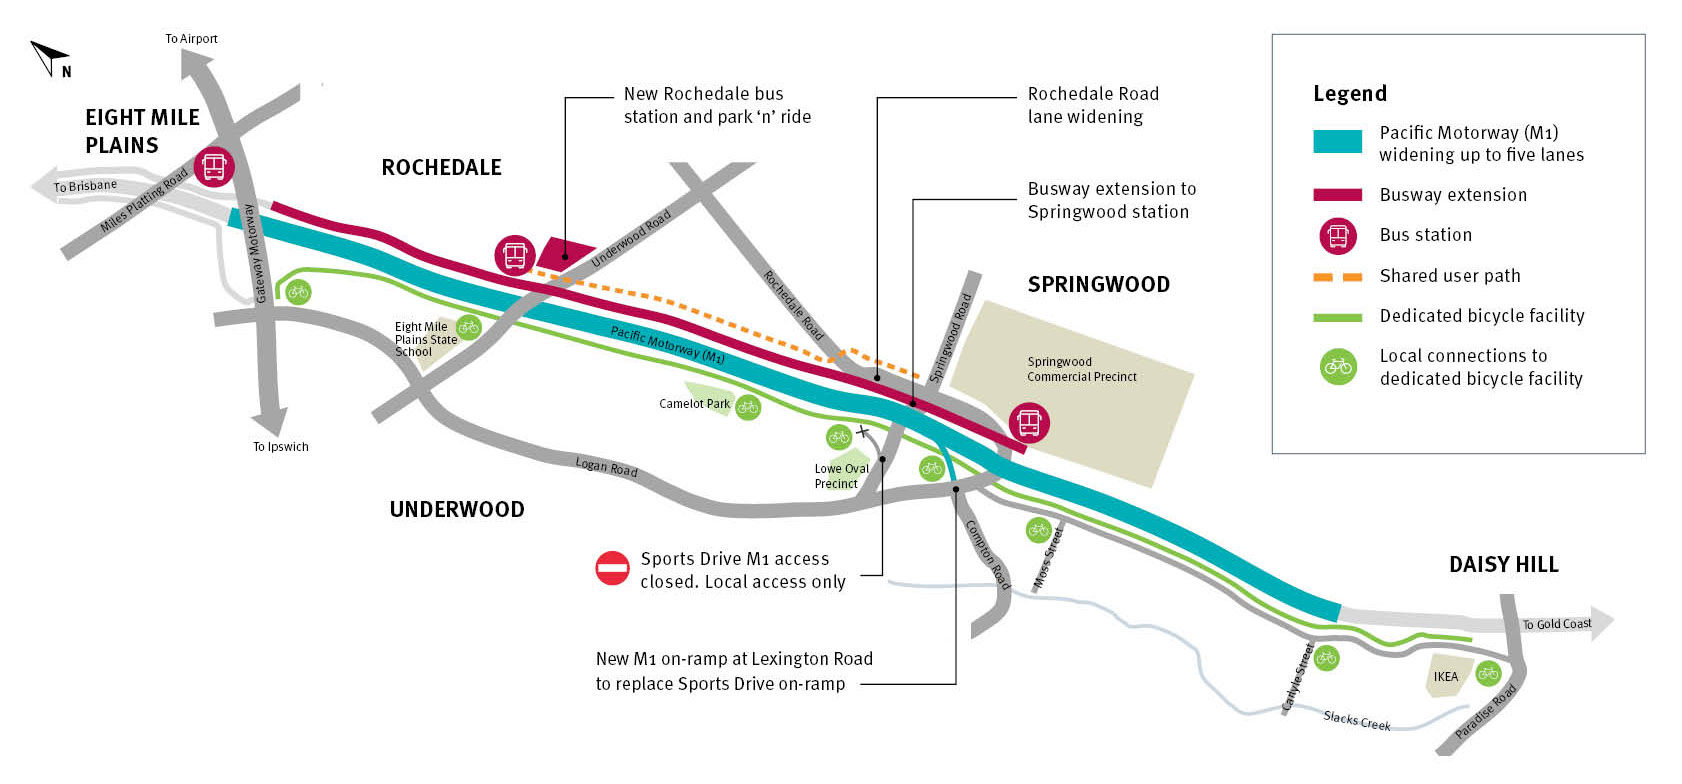 Schematic drawing highlighting upgrade features for the Pacific Motorway (M1), Eight Mile Plains to Daisy Hill, widen and extend busway project.